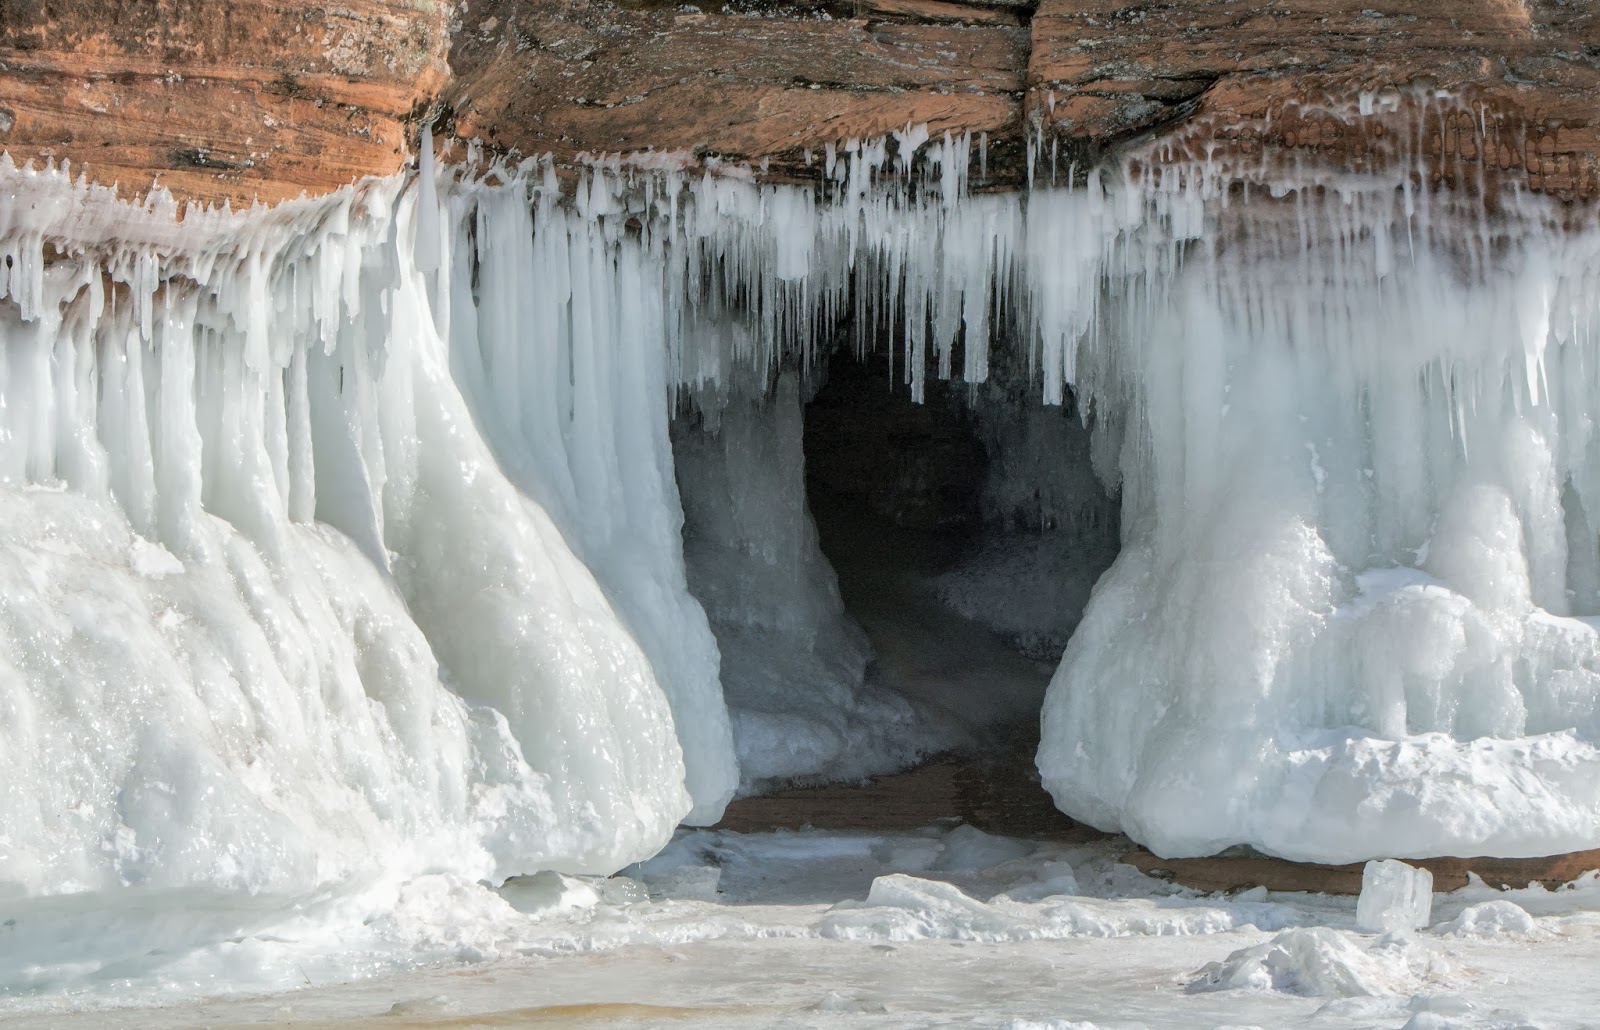 madeline island cave tours